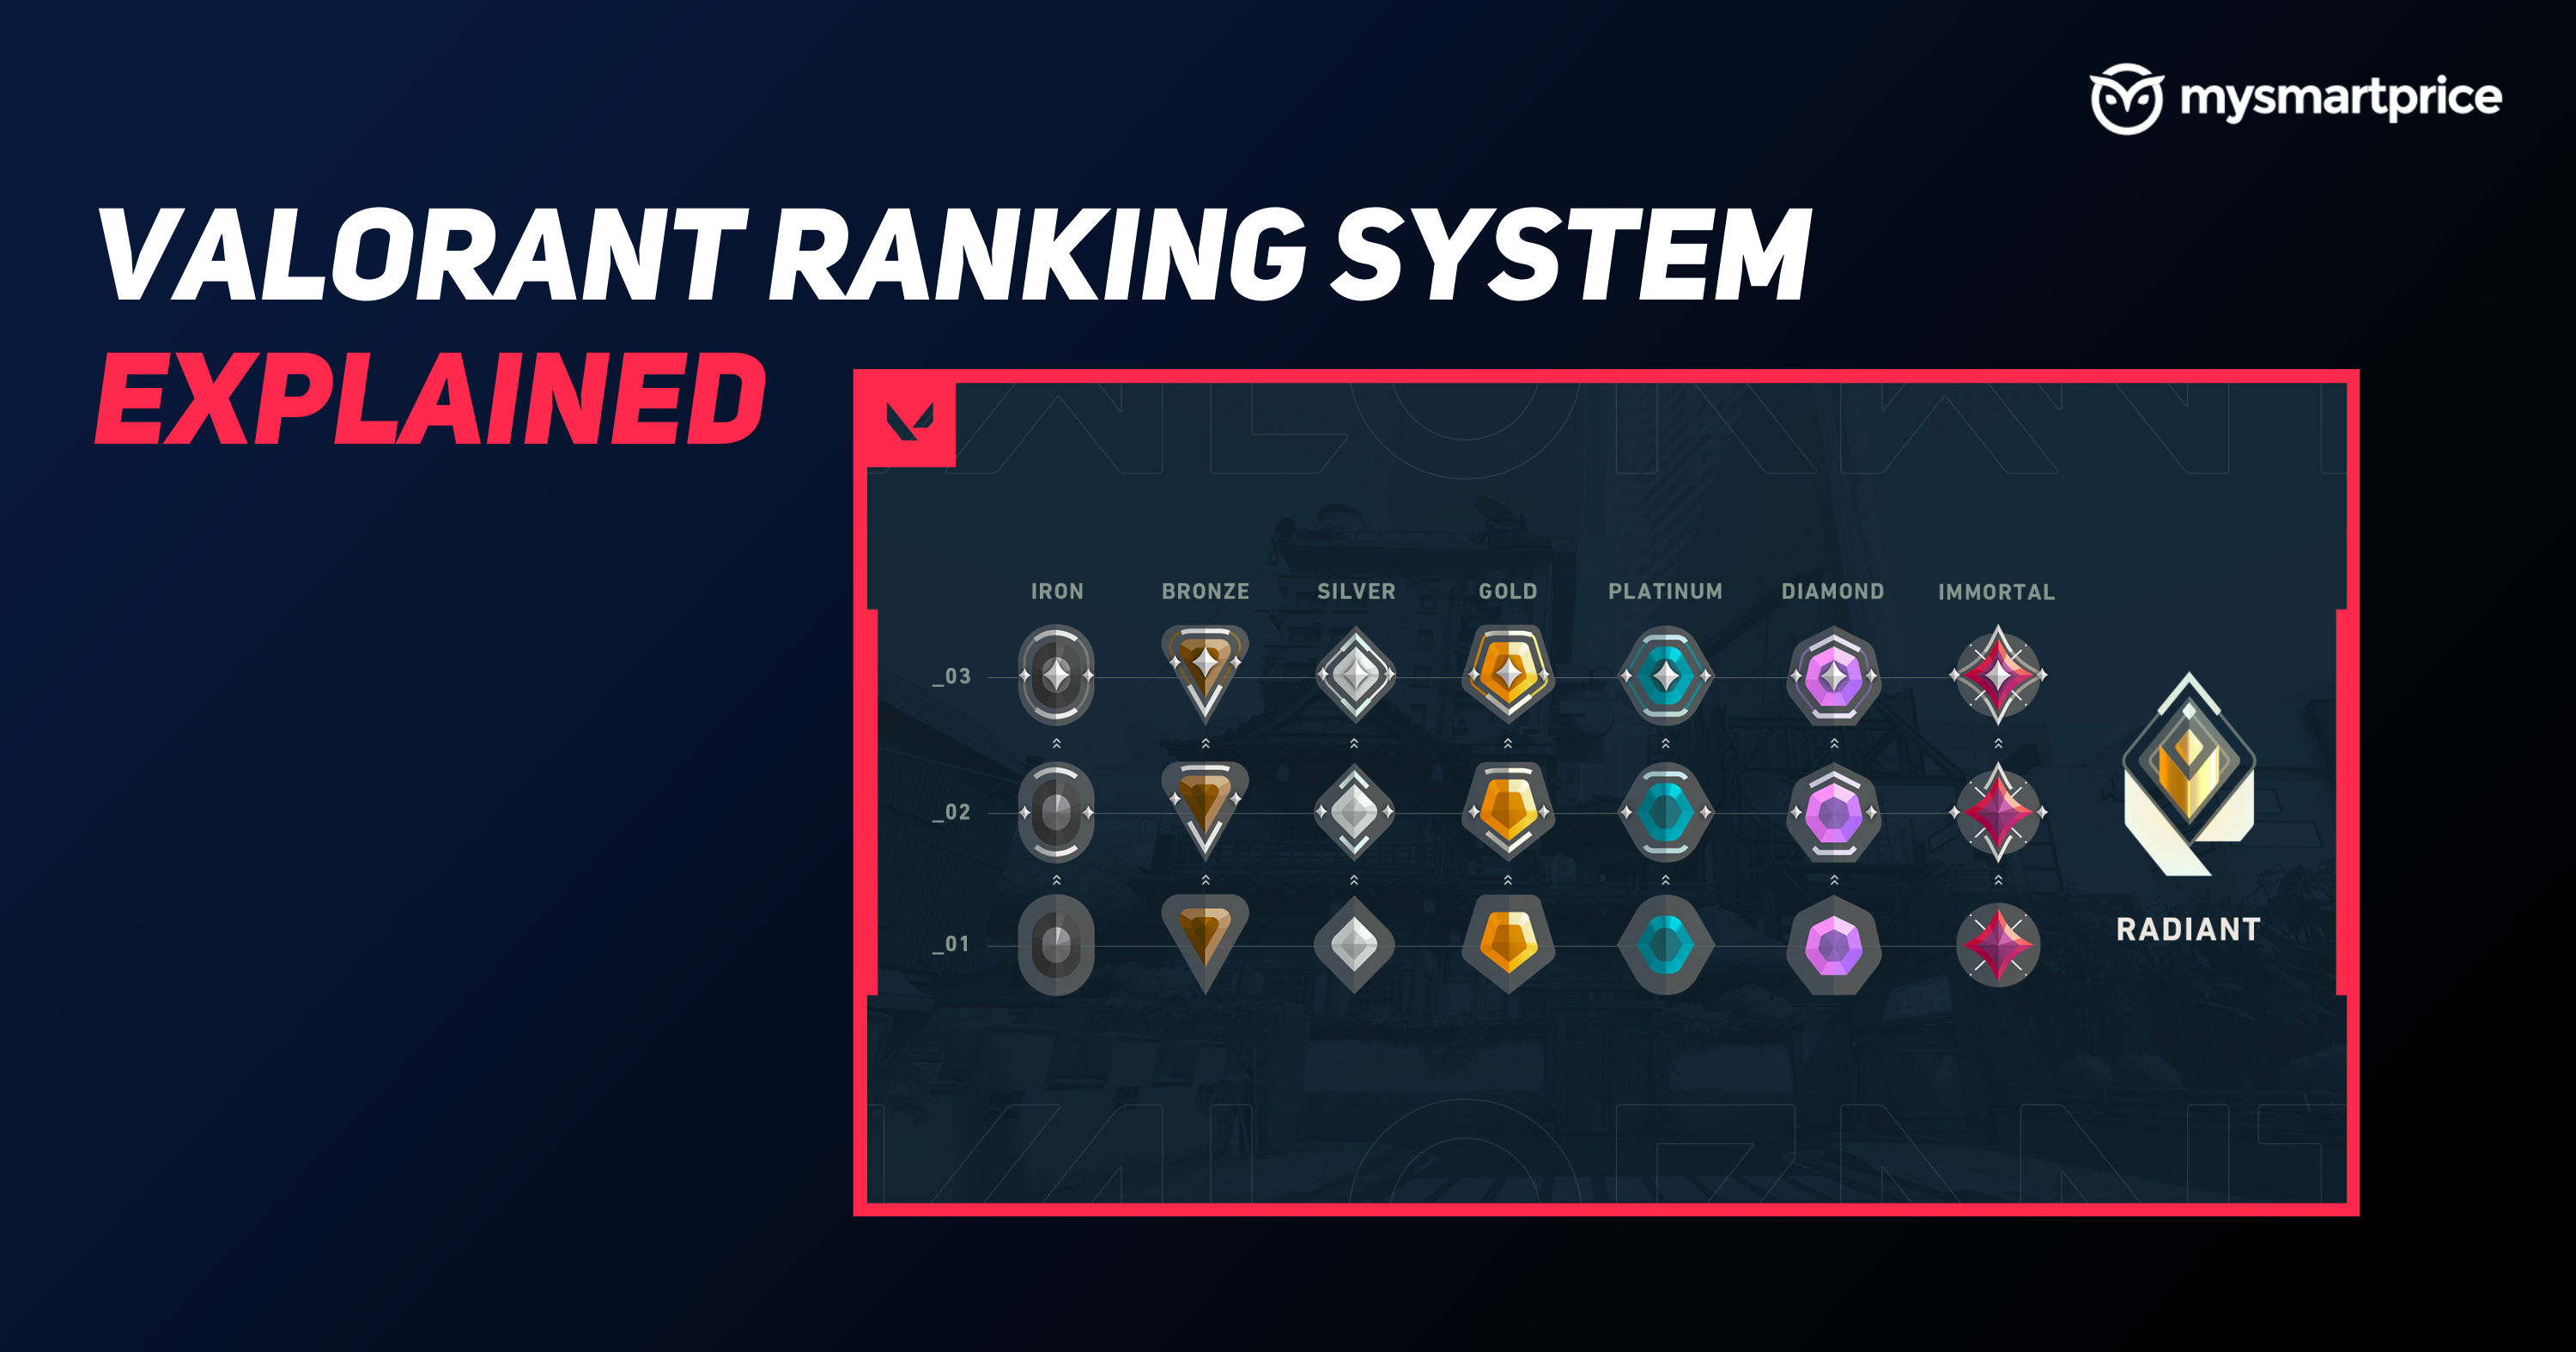 Valorant Ranking System Explained From Iron to Radiant, Here's How it